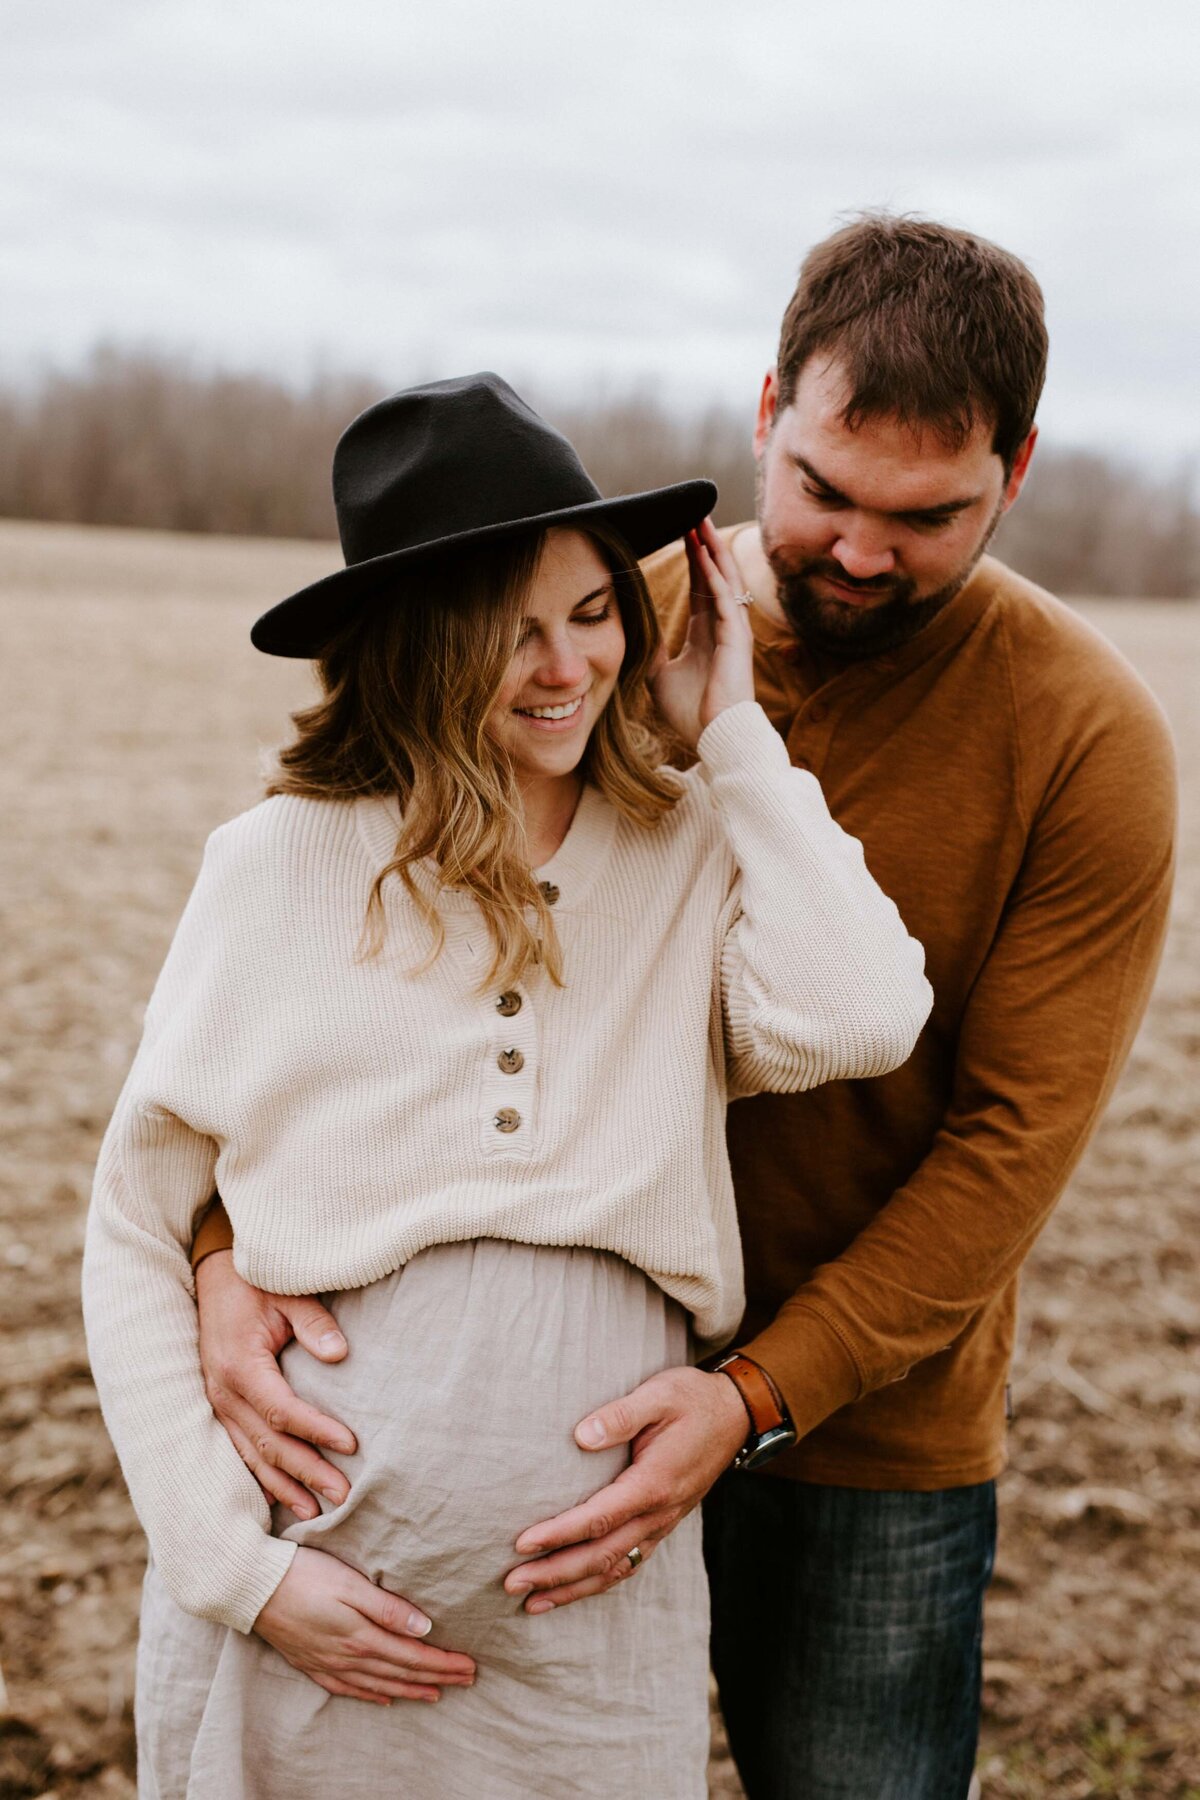 Expectant mom and Dad in Exeter, Ontario farmers field for maternity photo session. Mom is facing the camera, dad is behind mom holding her bump. Mom has one hand on her belly and the other is touching her hat. Both mom and dad are smiling at her belly.